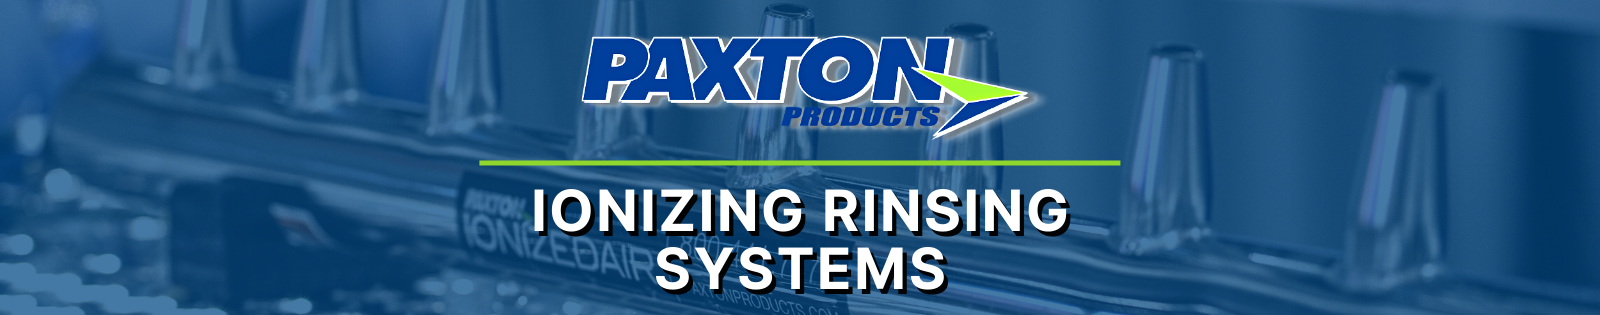 Paxton Products - Pharmaceutical, Medical, Nutraceutical Applications 